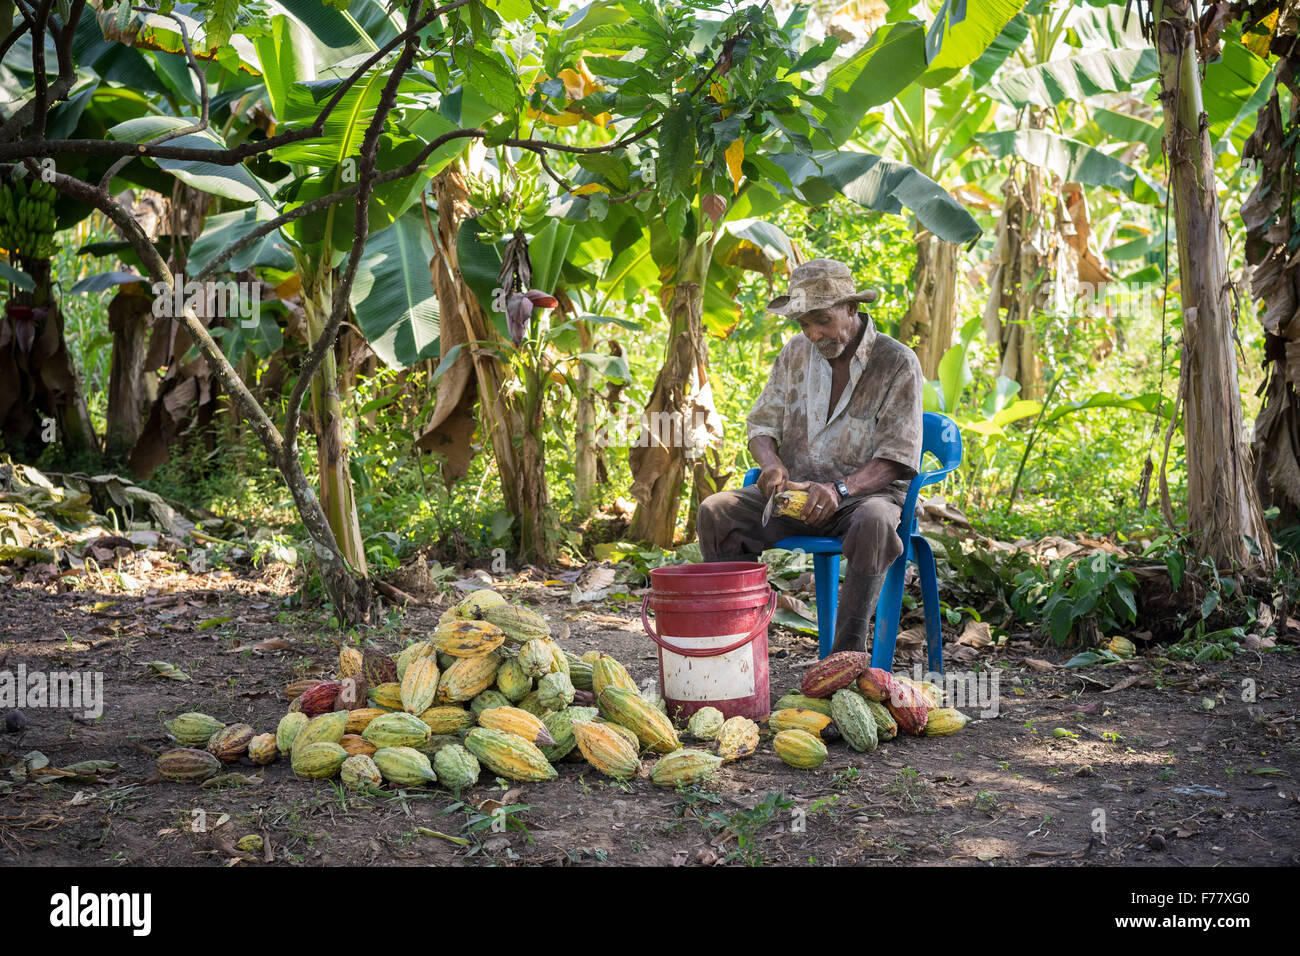 A farmer cuts into the rind of ripe cocoa pods to remove the pulp and cocoa seeds during harvest on a small farm February 23, 2015 in Isla de la Amargura, Careers, Colombia. Cocoa pods are dried and fermented becoming the basis of chocolate. Stock Photo